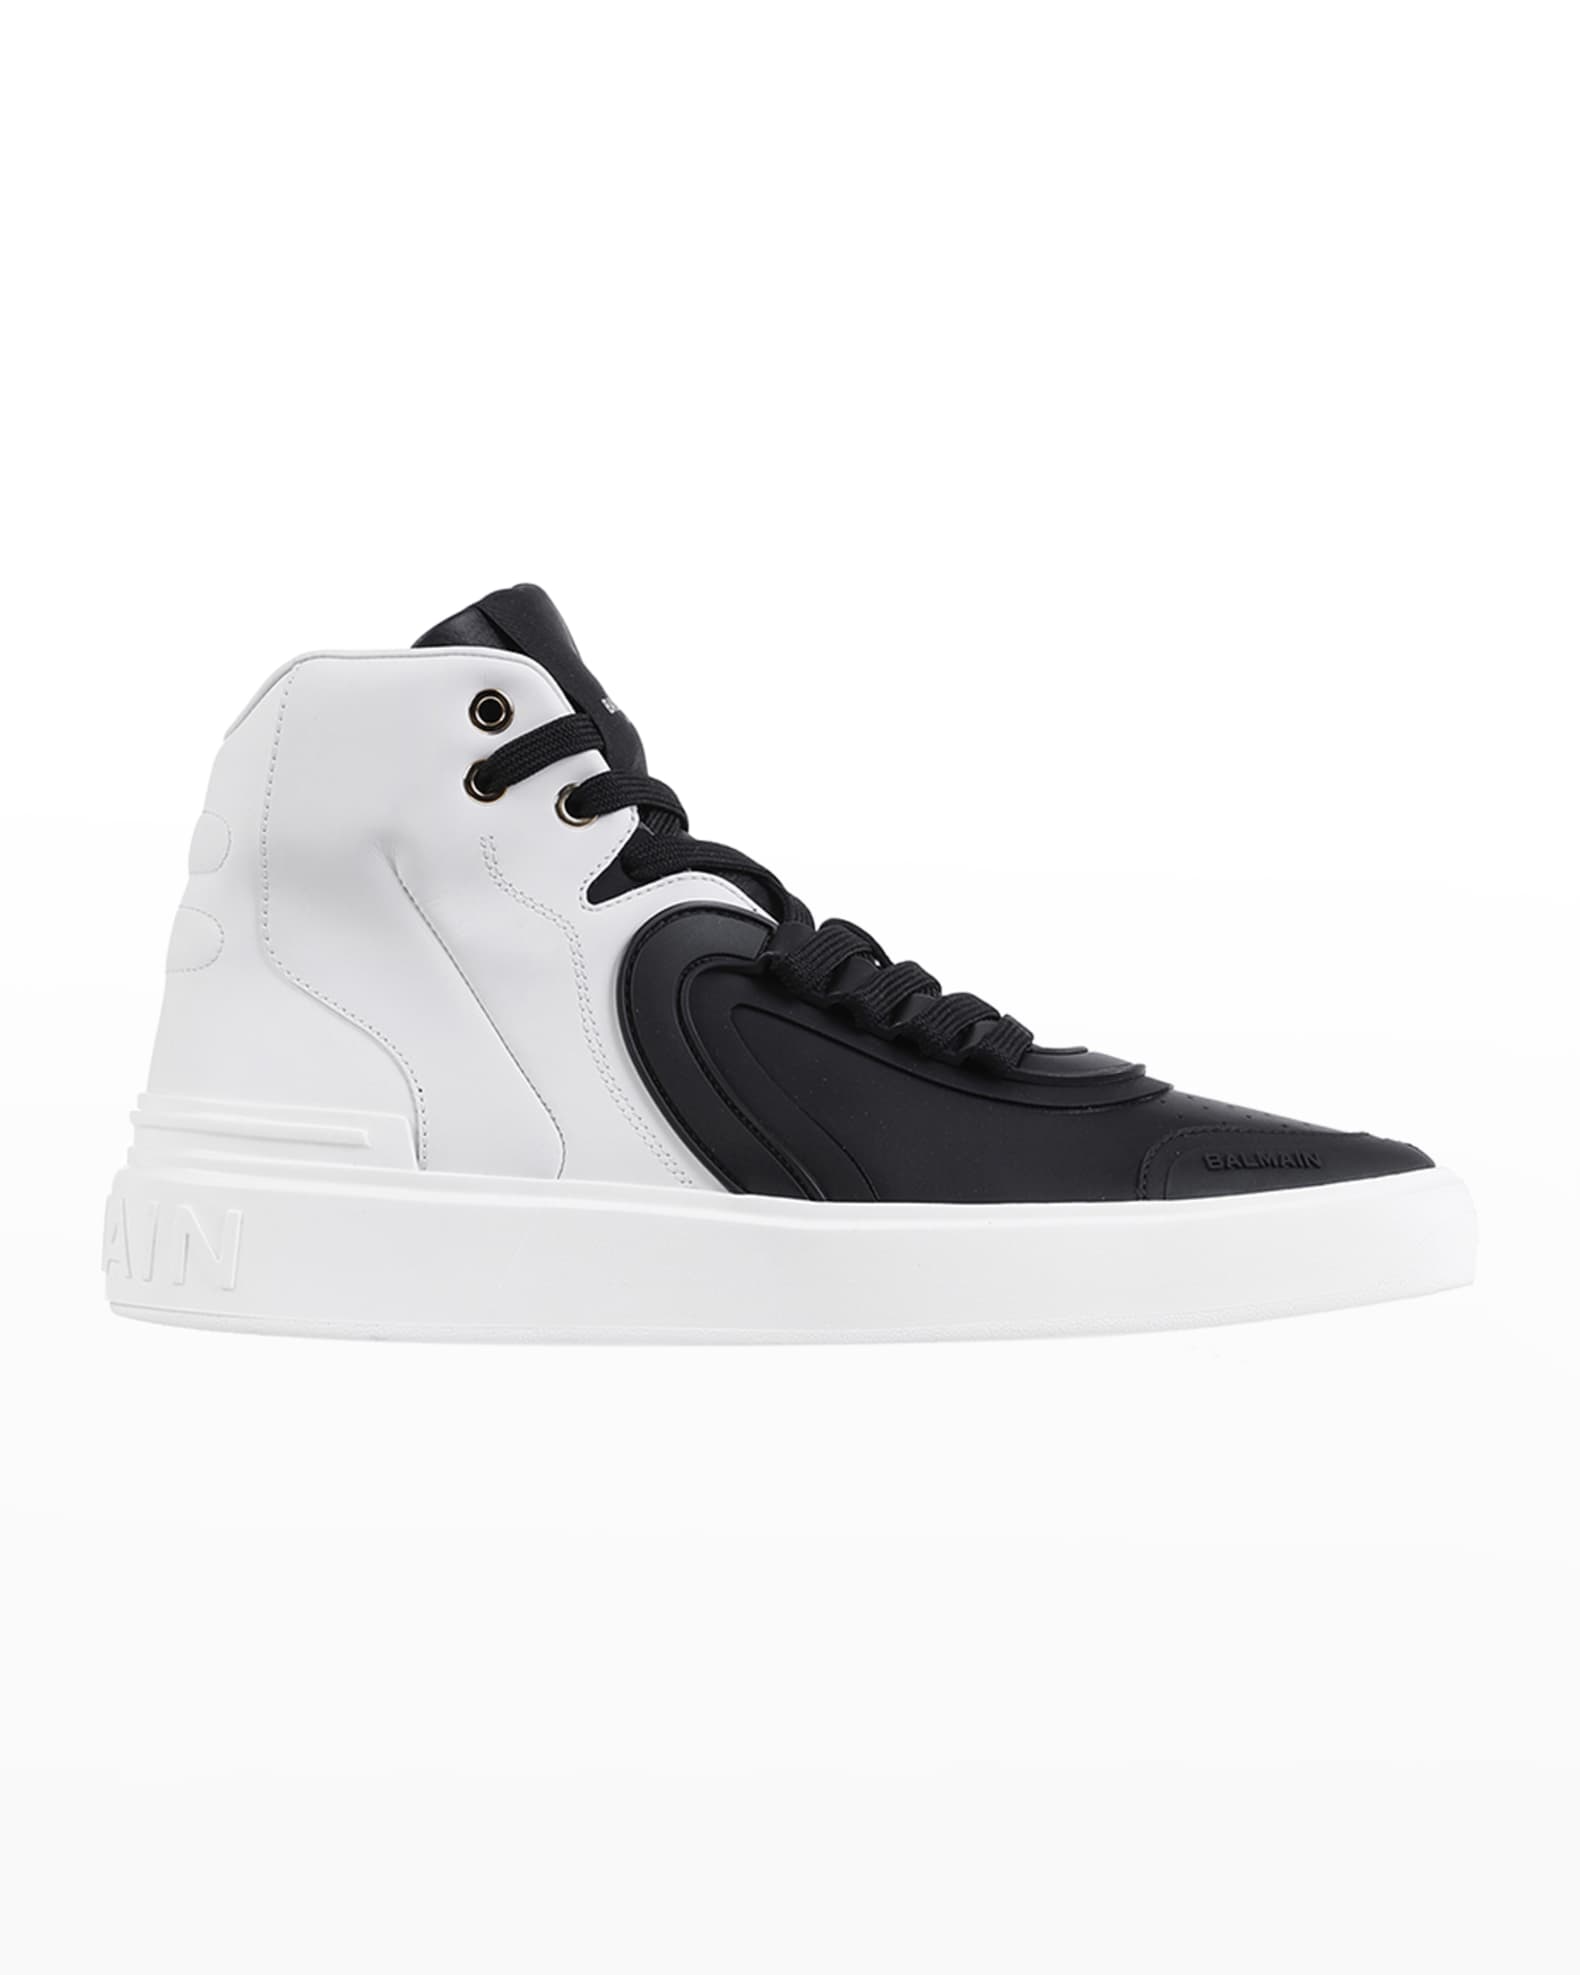 Men's High-Top Leather Skate Sneakers Marcus